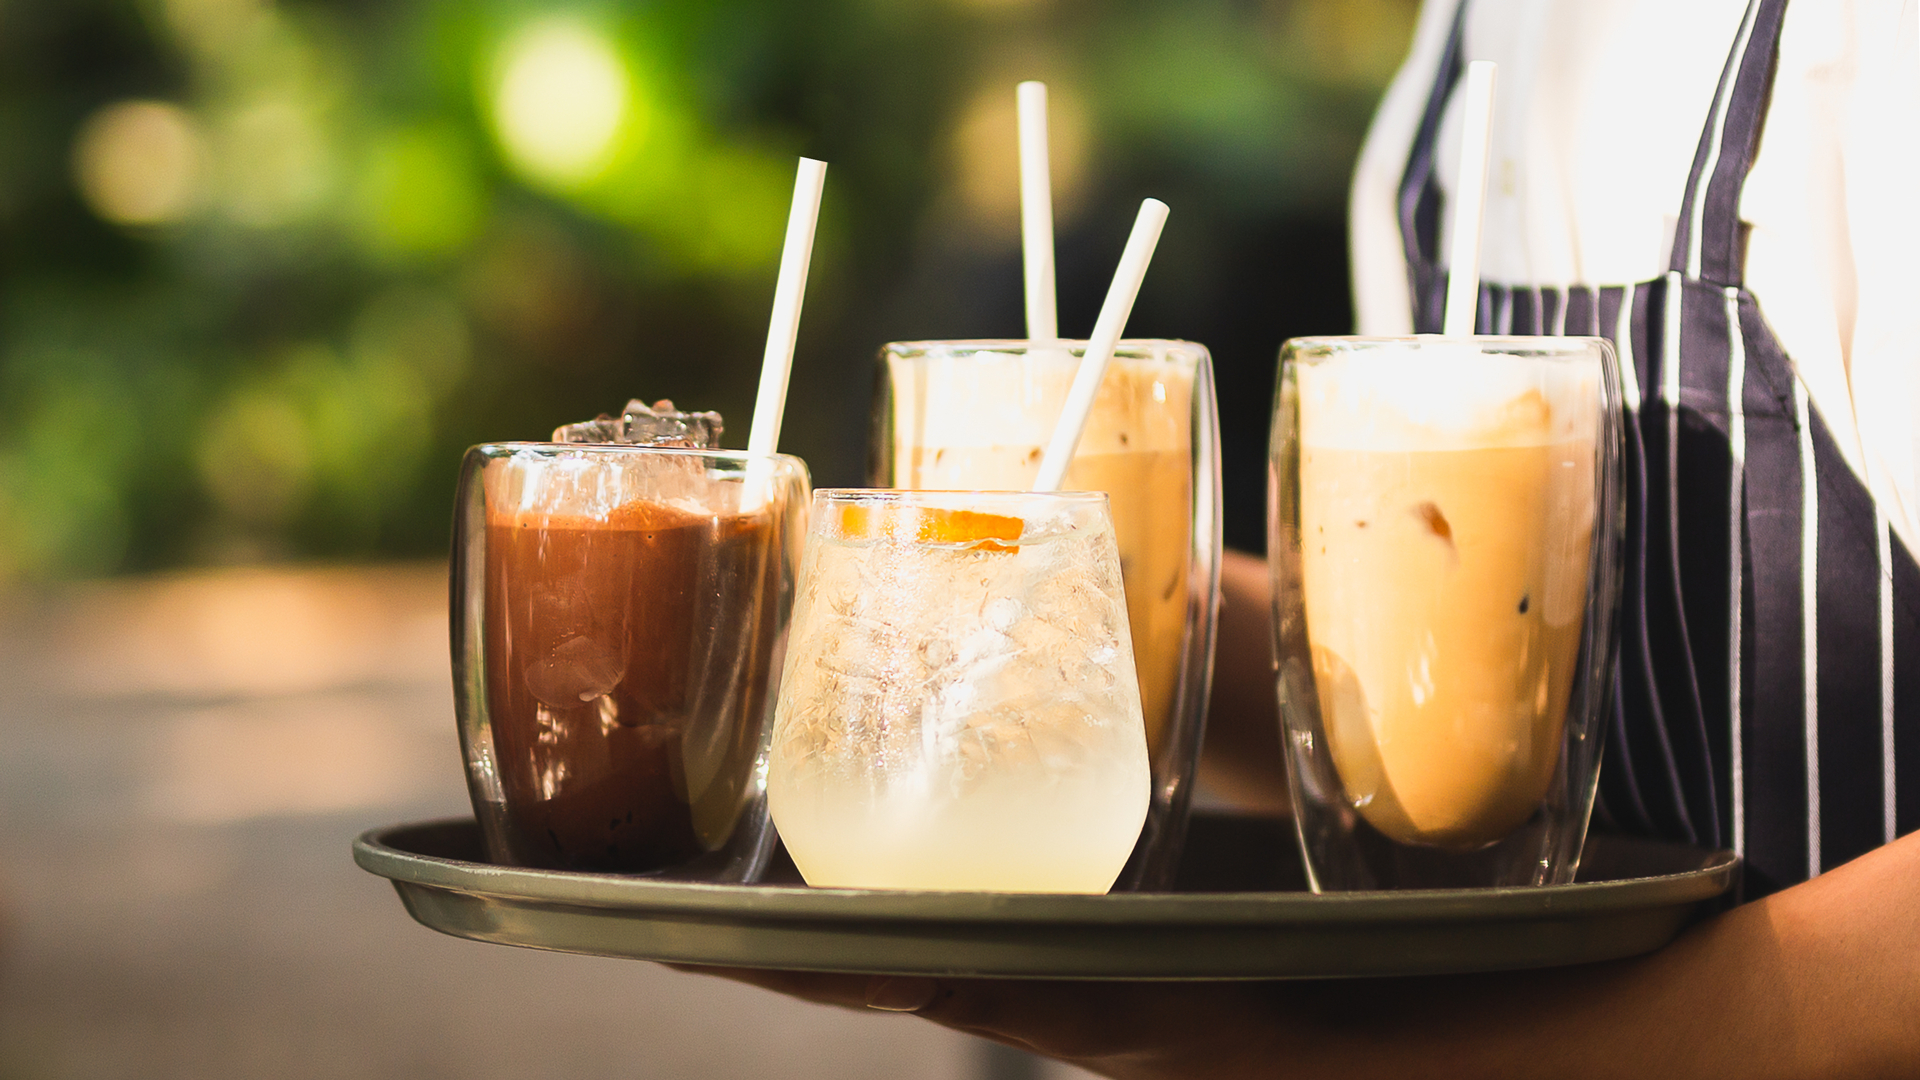 Non-alcoholic drinks encompass far more than just the drinks disguised as alcoholic ones. Non-alcoholic drinks include everything from coffee and tea to soda, energy drinks, smoothies and milkshakes. And they are profit centers for most operators.